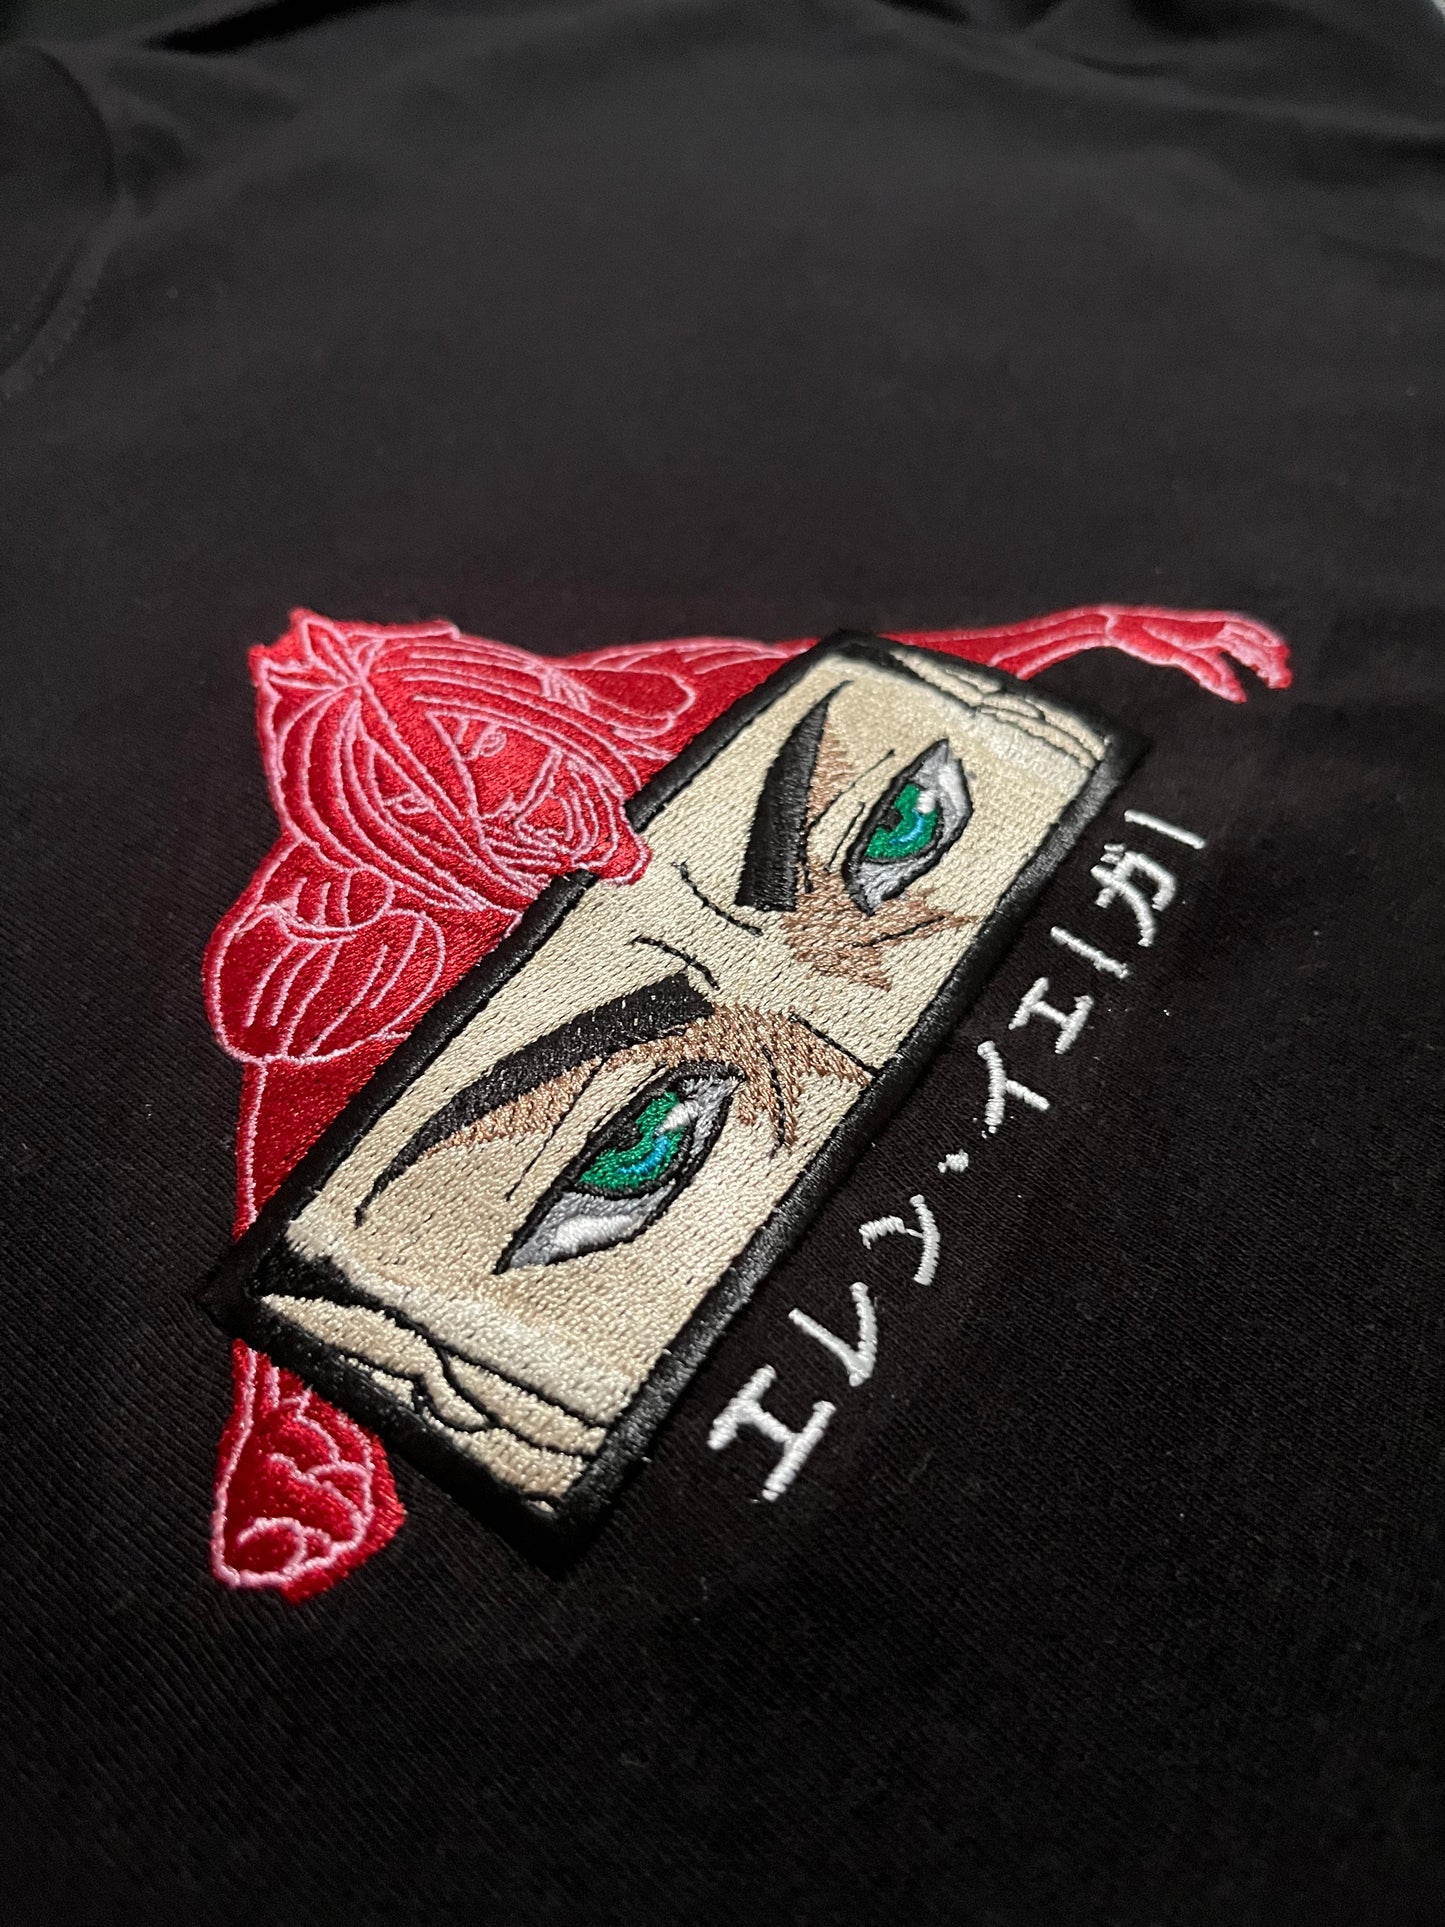 Eren Yeager Eyes Embroidery (SNK)